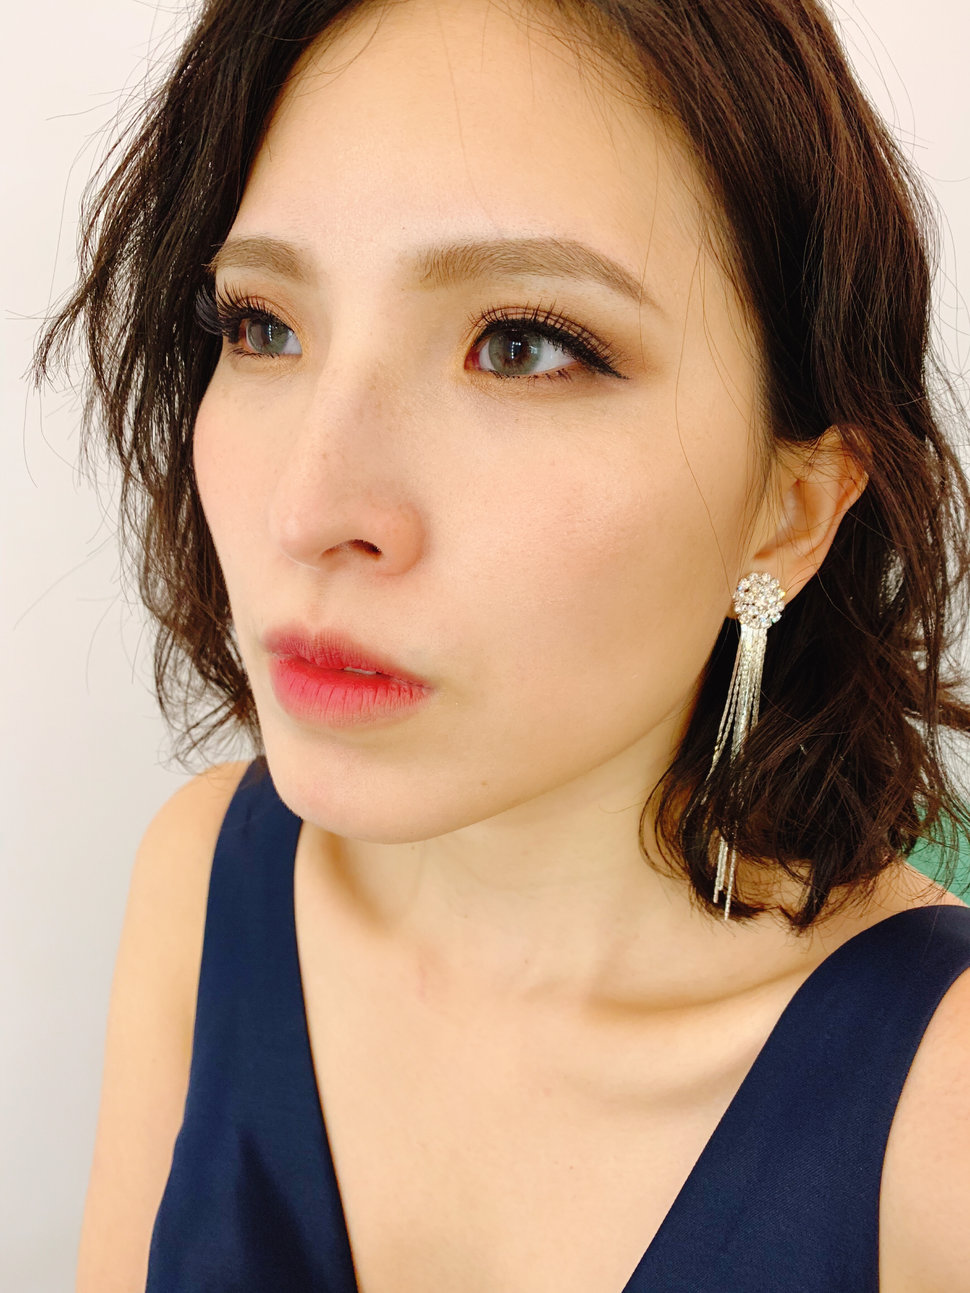 IMG_4957 - Little A Love Makeup《結婚吧》